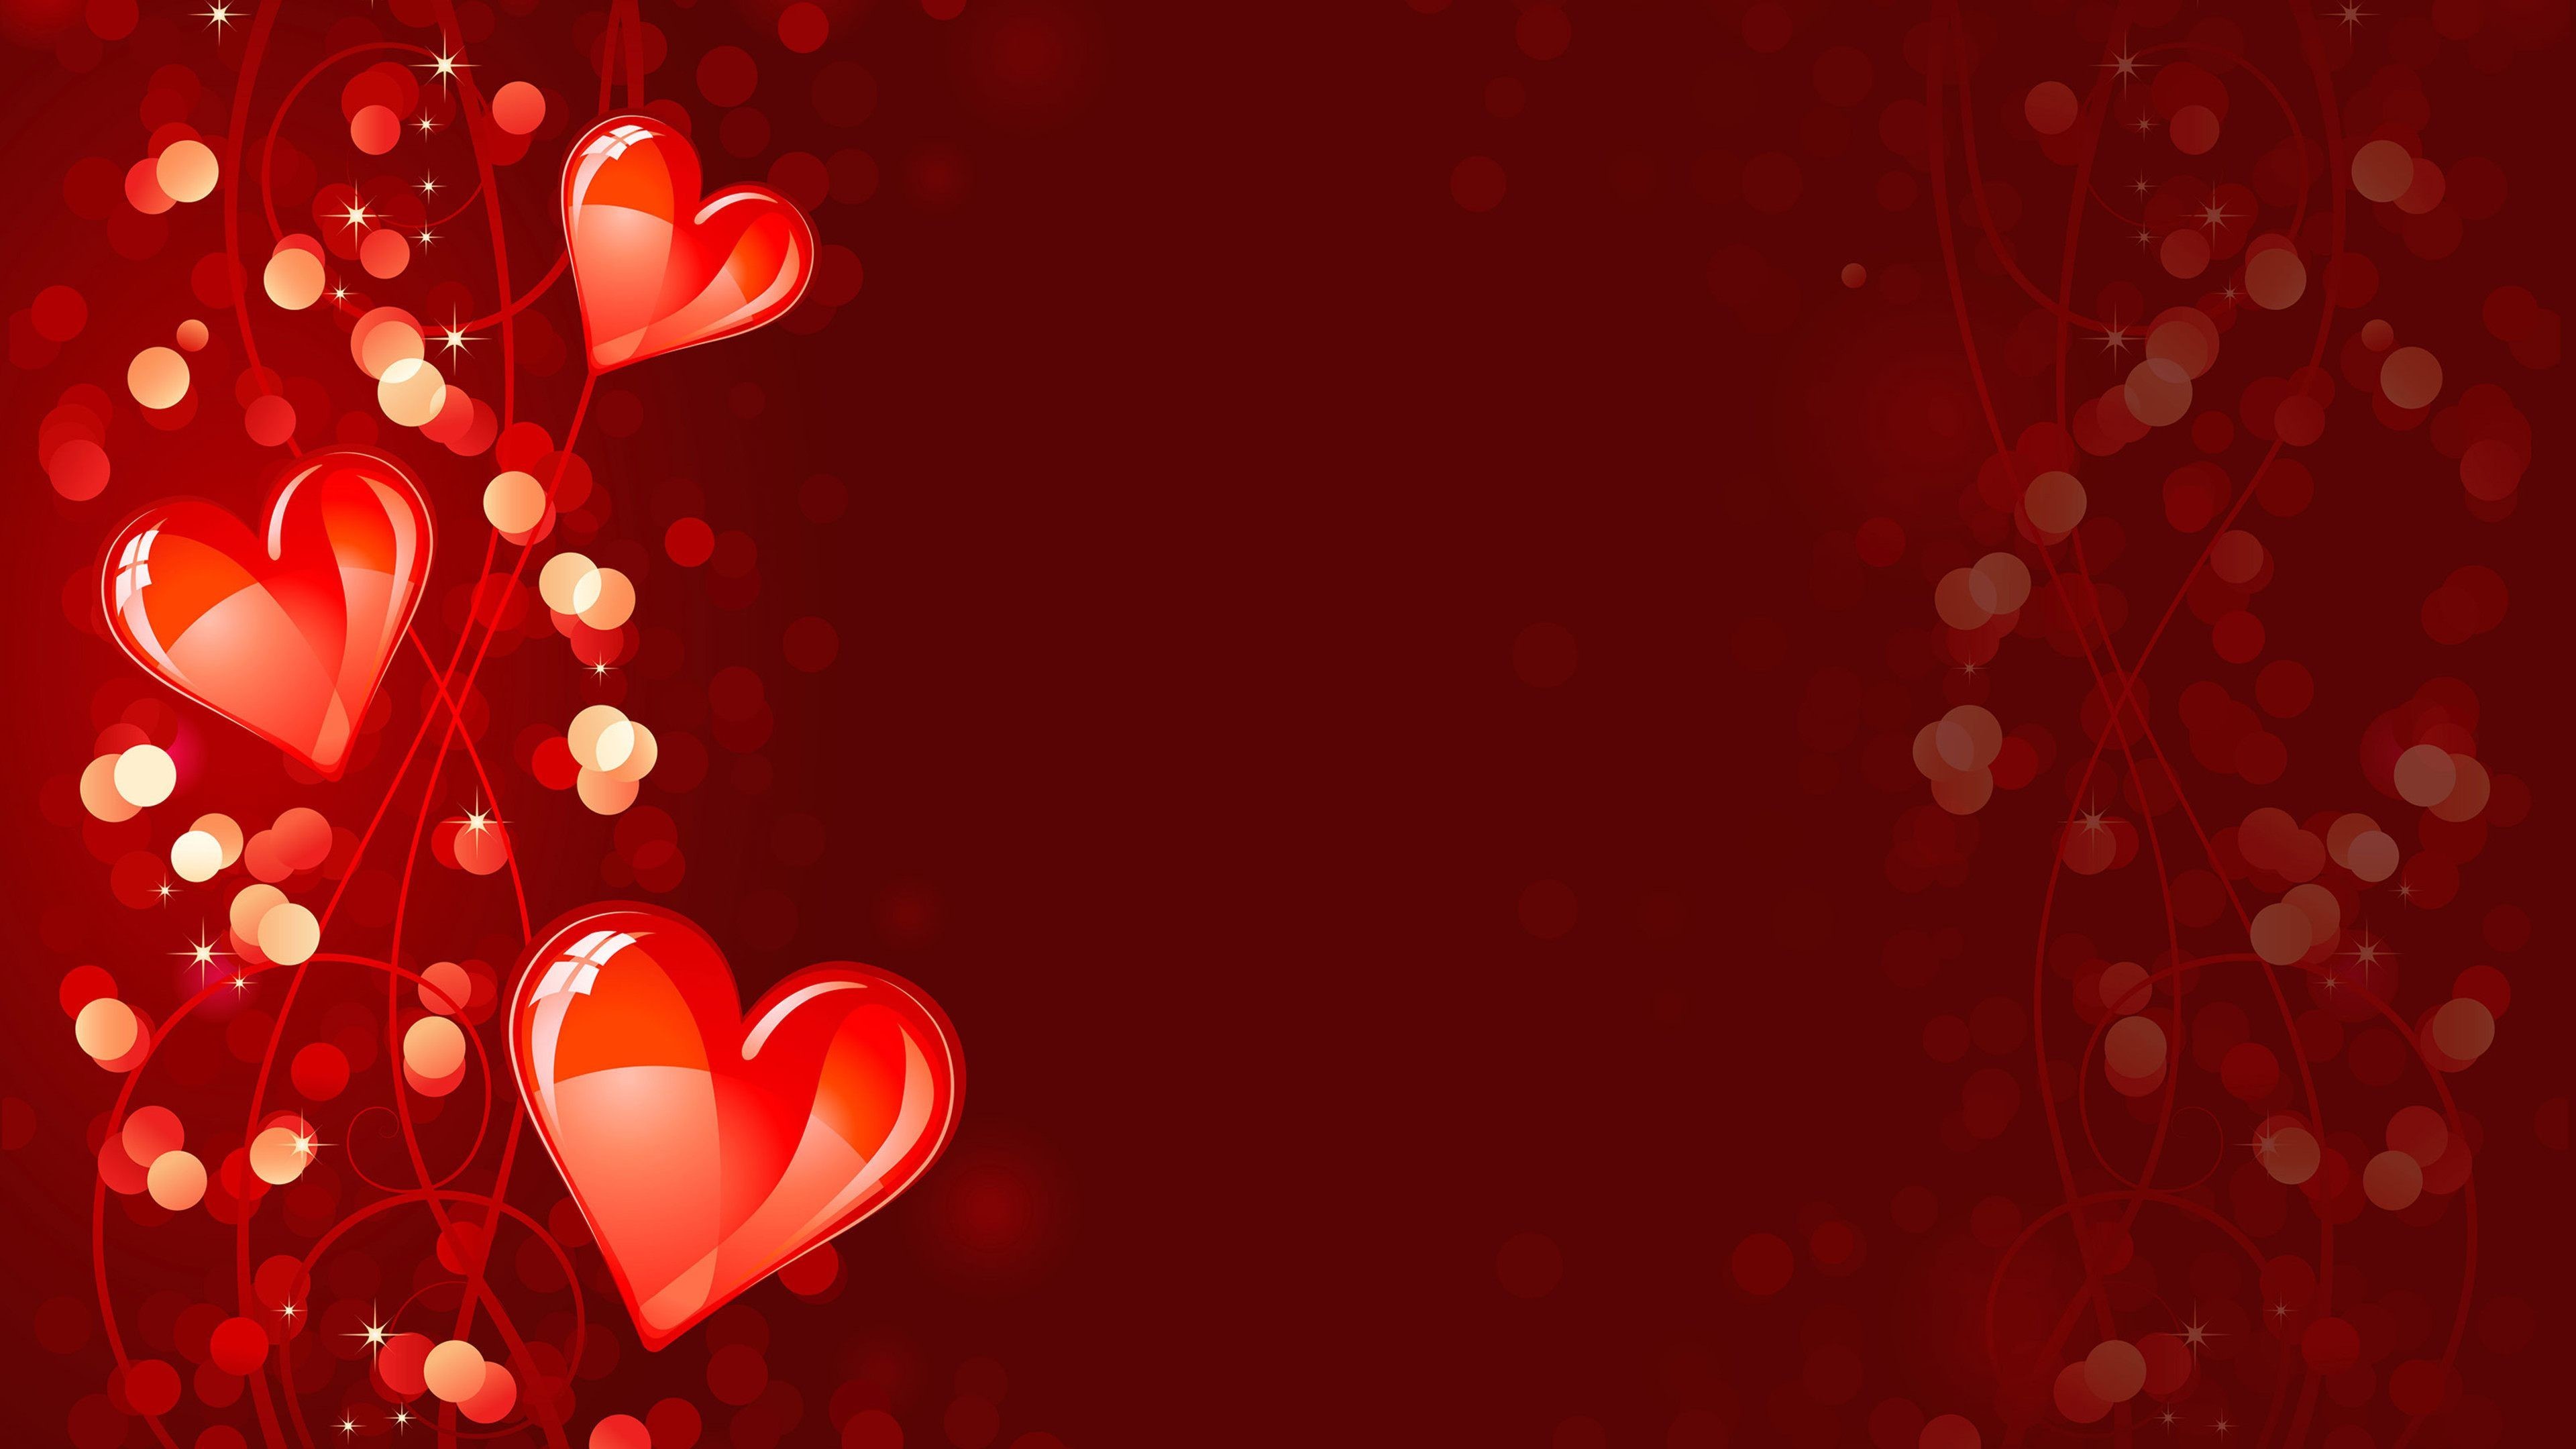 HD red background with hearts wallpapers